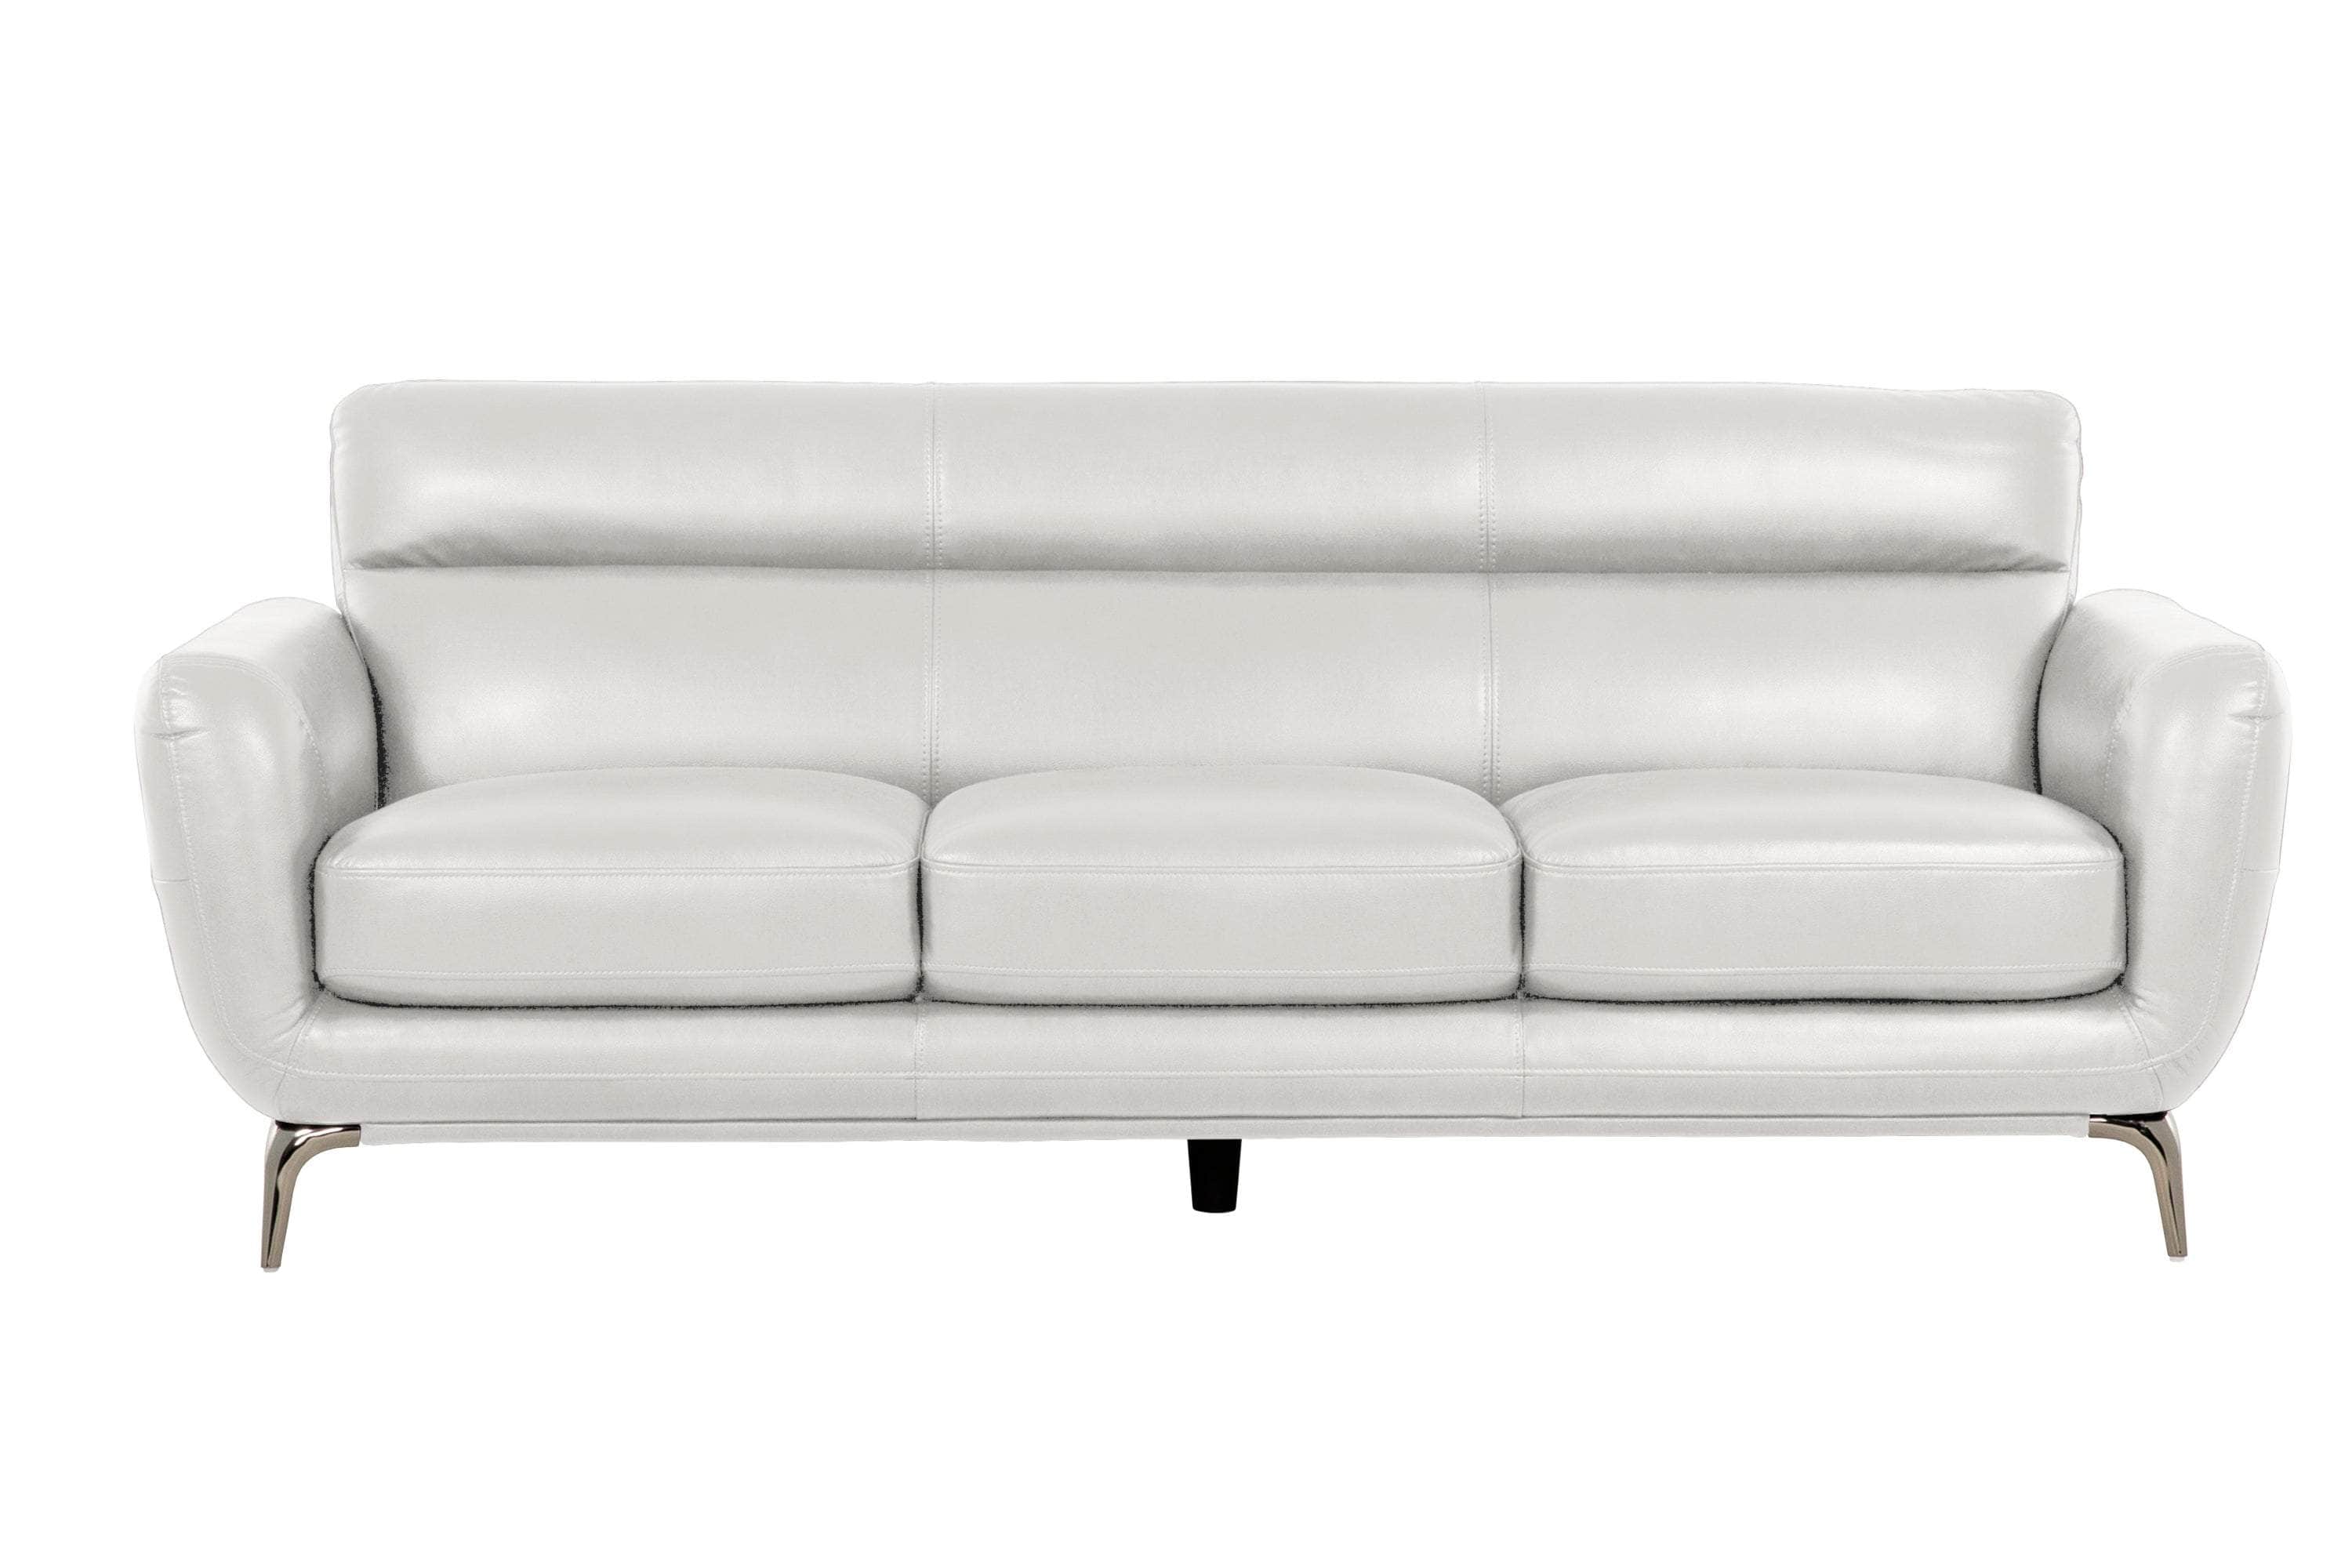 True Contemporary Sofa Grey William Tufted Faux Leather Sofa - Available in 2 Colours